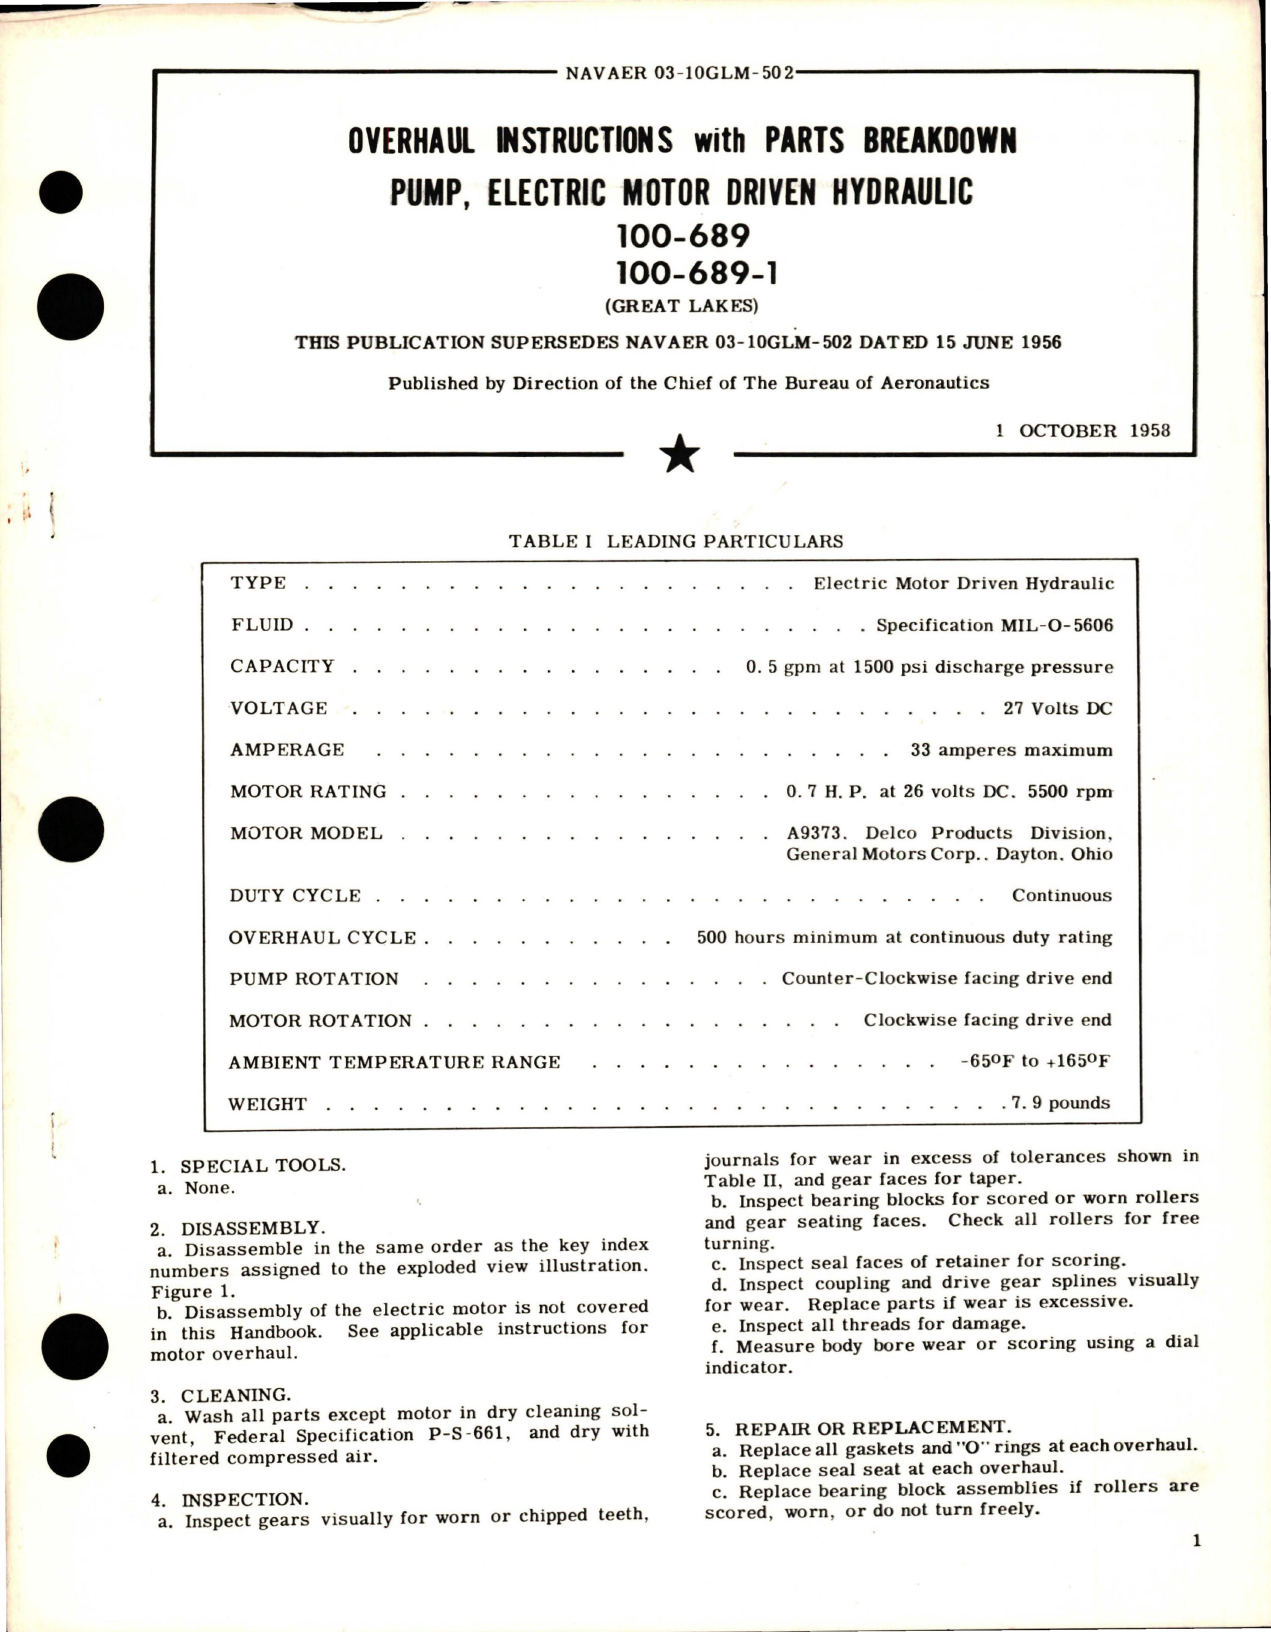 Sample page 1 from AirCorps Library document: Overhaul Instructions with Parts for Electric Motor Driven Hydraulic Pump - 100-689 and 100-689-1